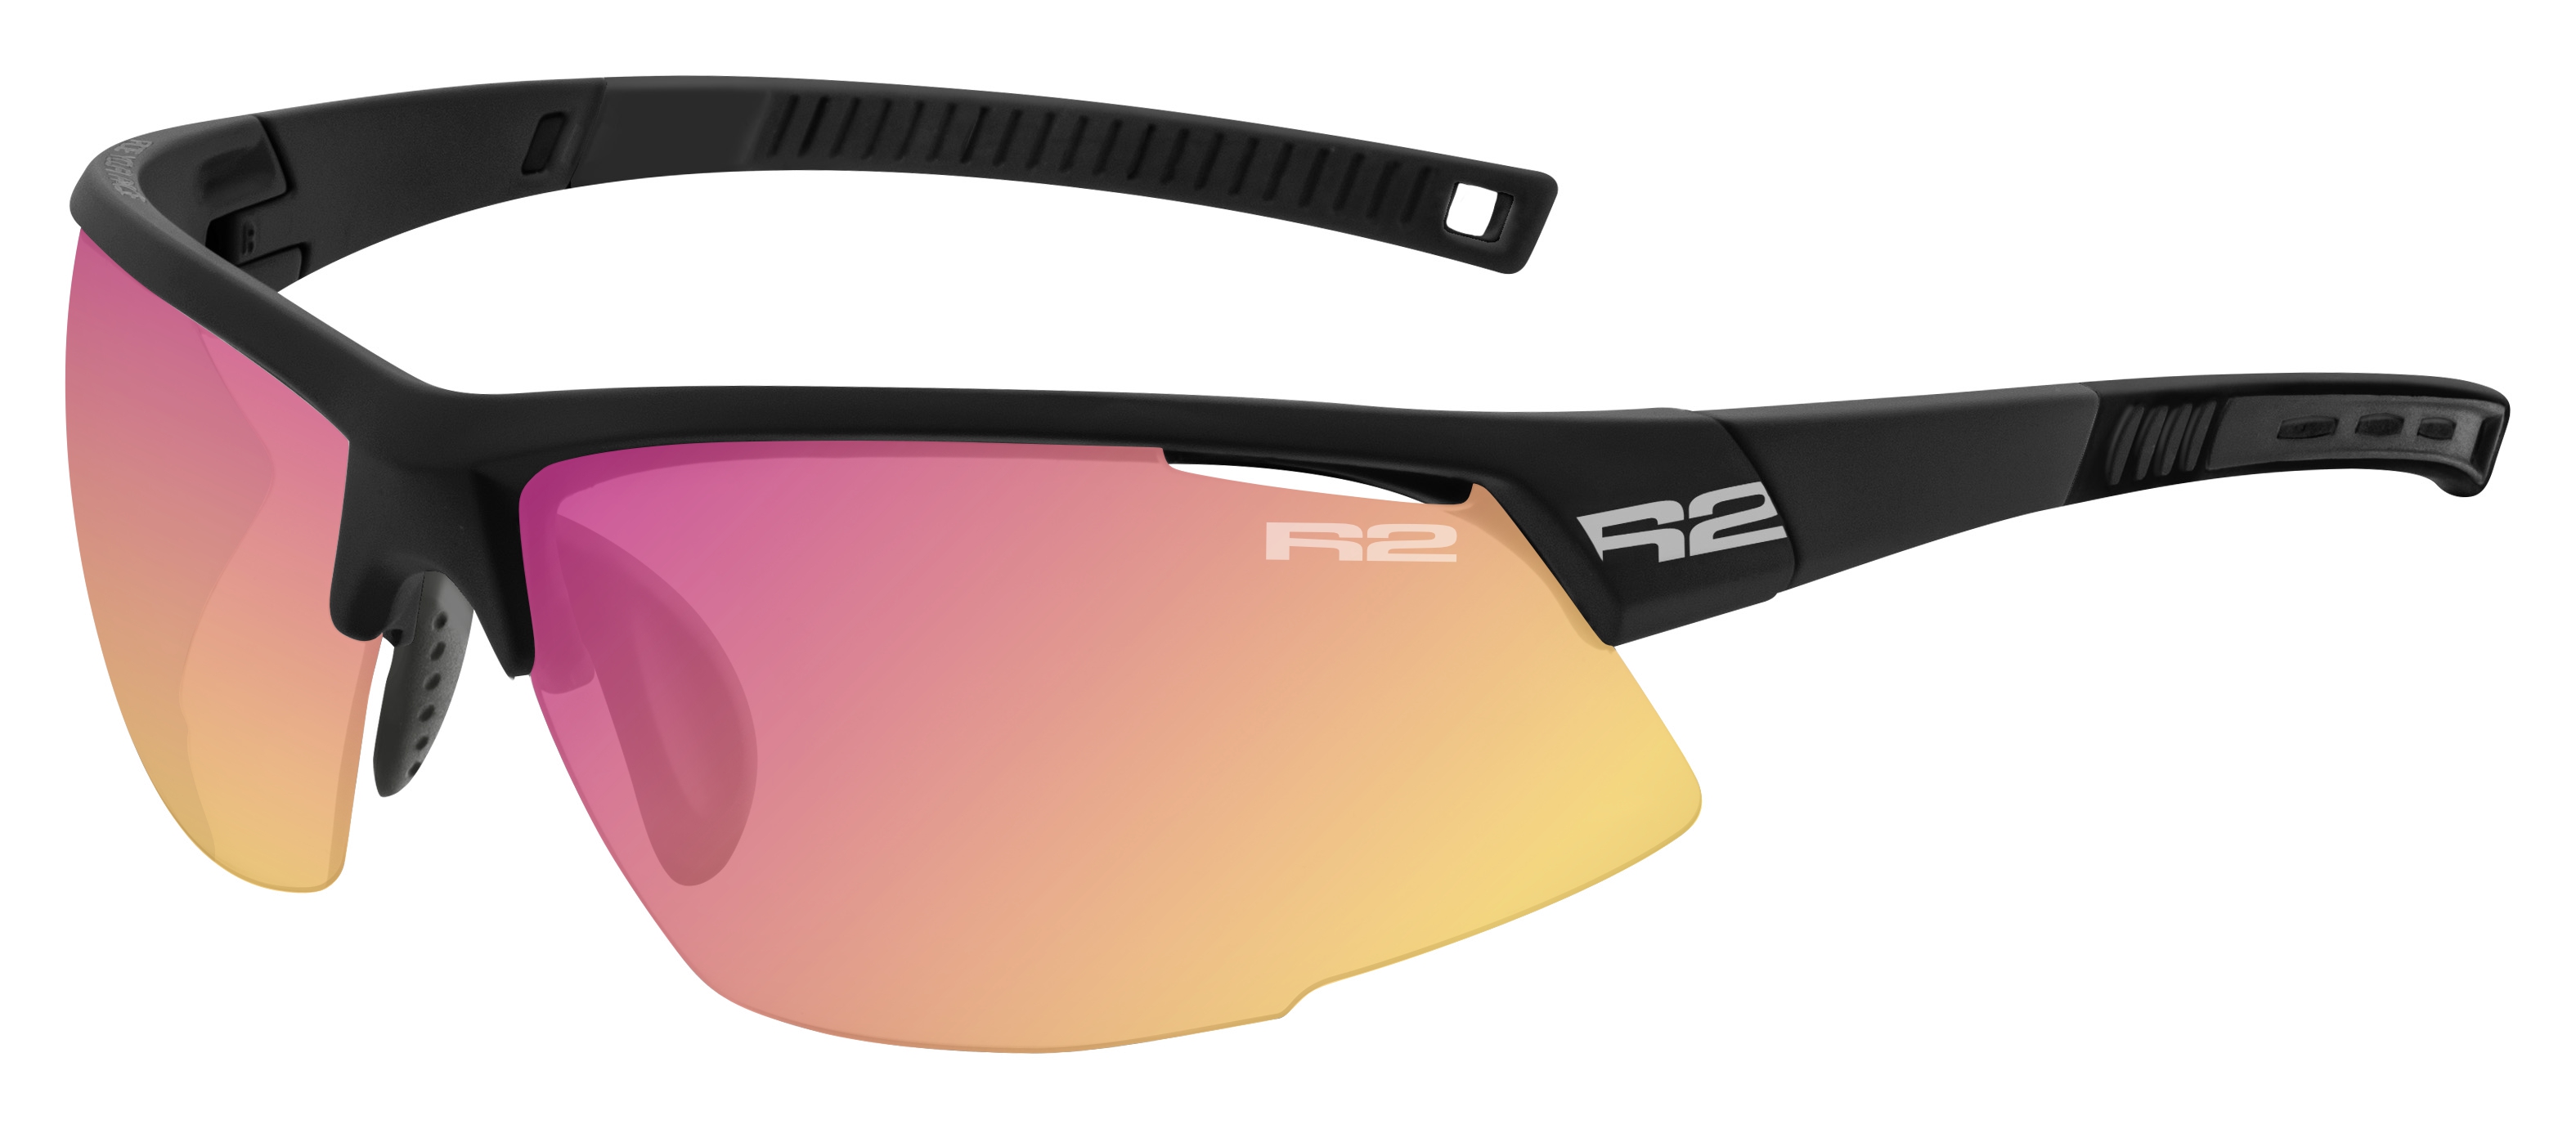 Photochromatic sunglasses  R2 RACER AT063A9 standard